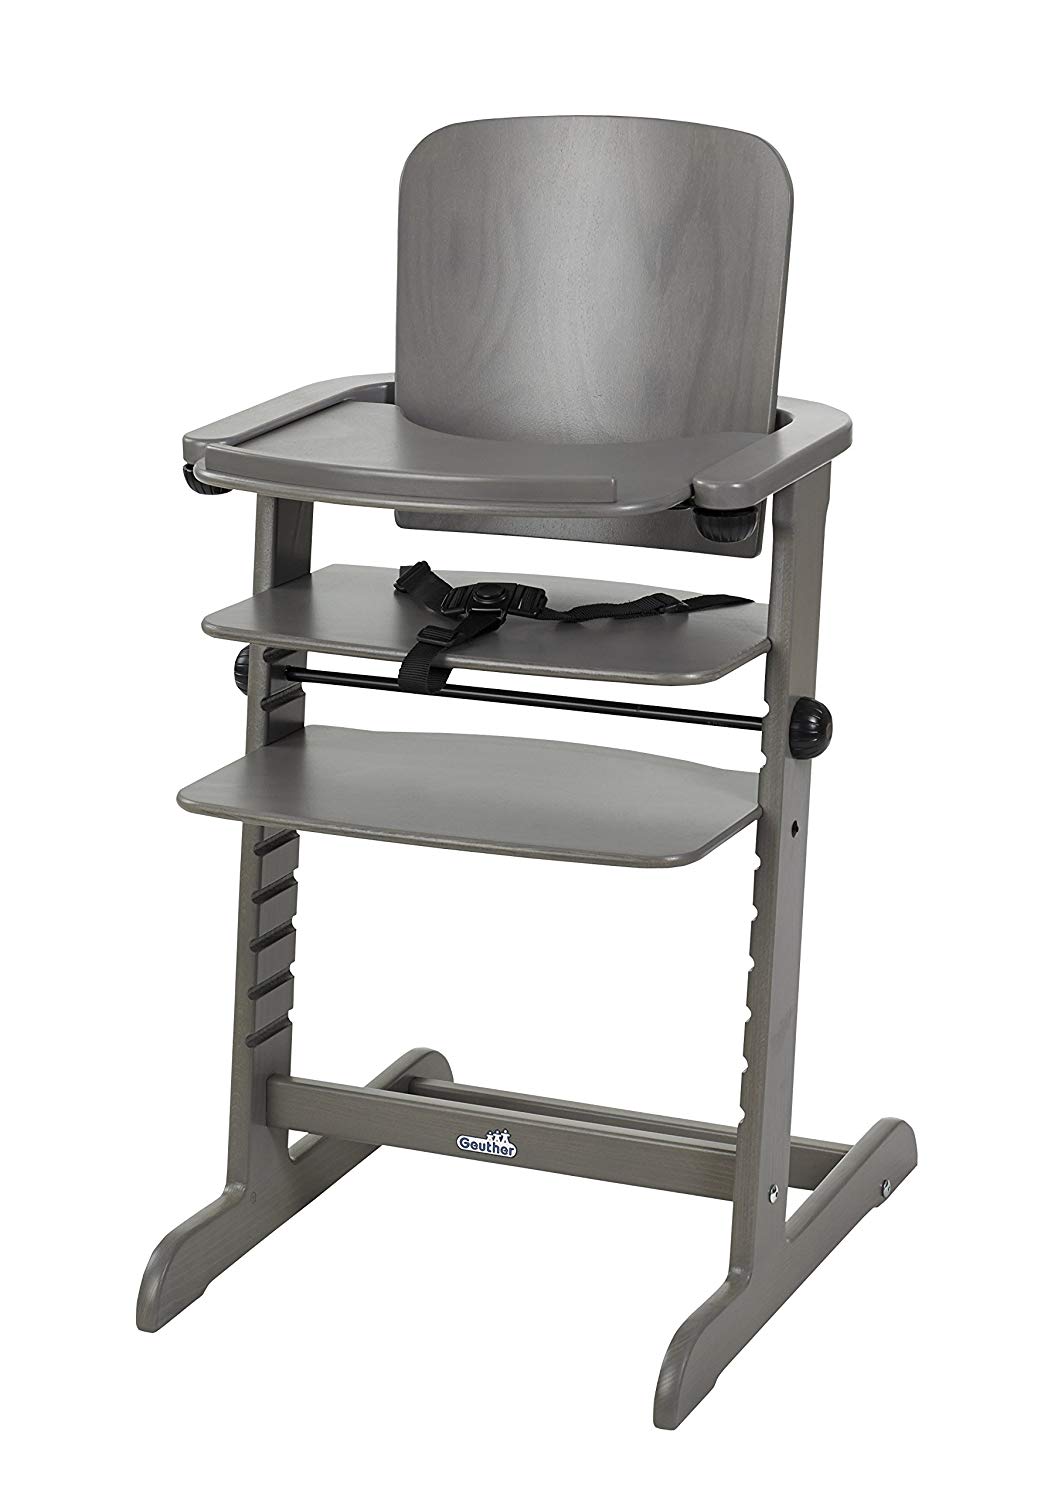 Honest Forwarder | Geuther High Chair/Grows Family Clay mud